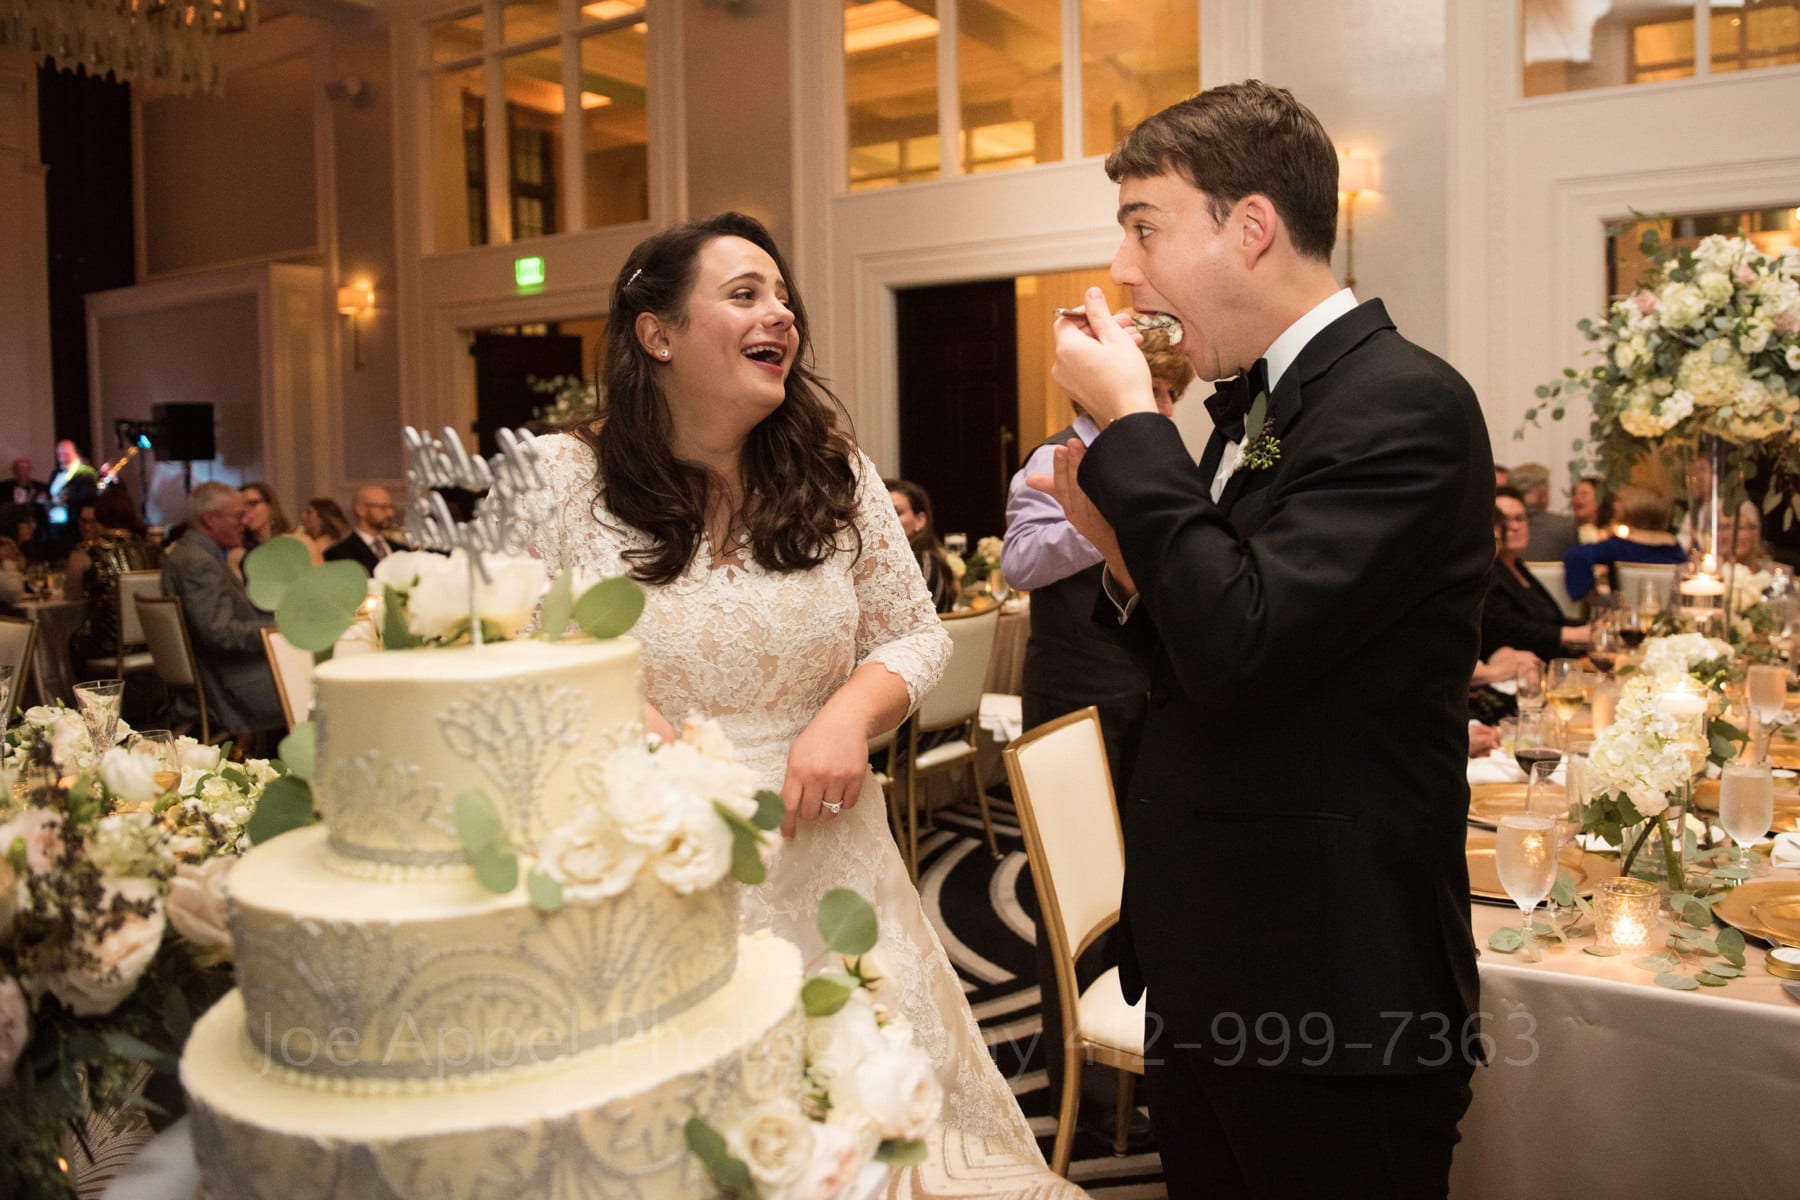 a bride laughs as the groom shoves a huge forkful of their wedding cake into his mouth